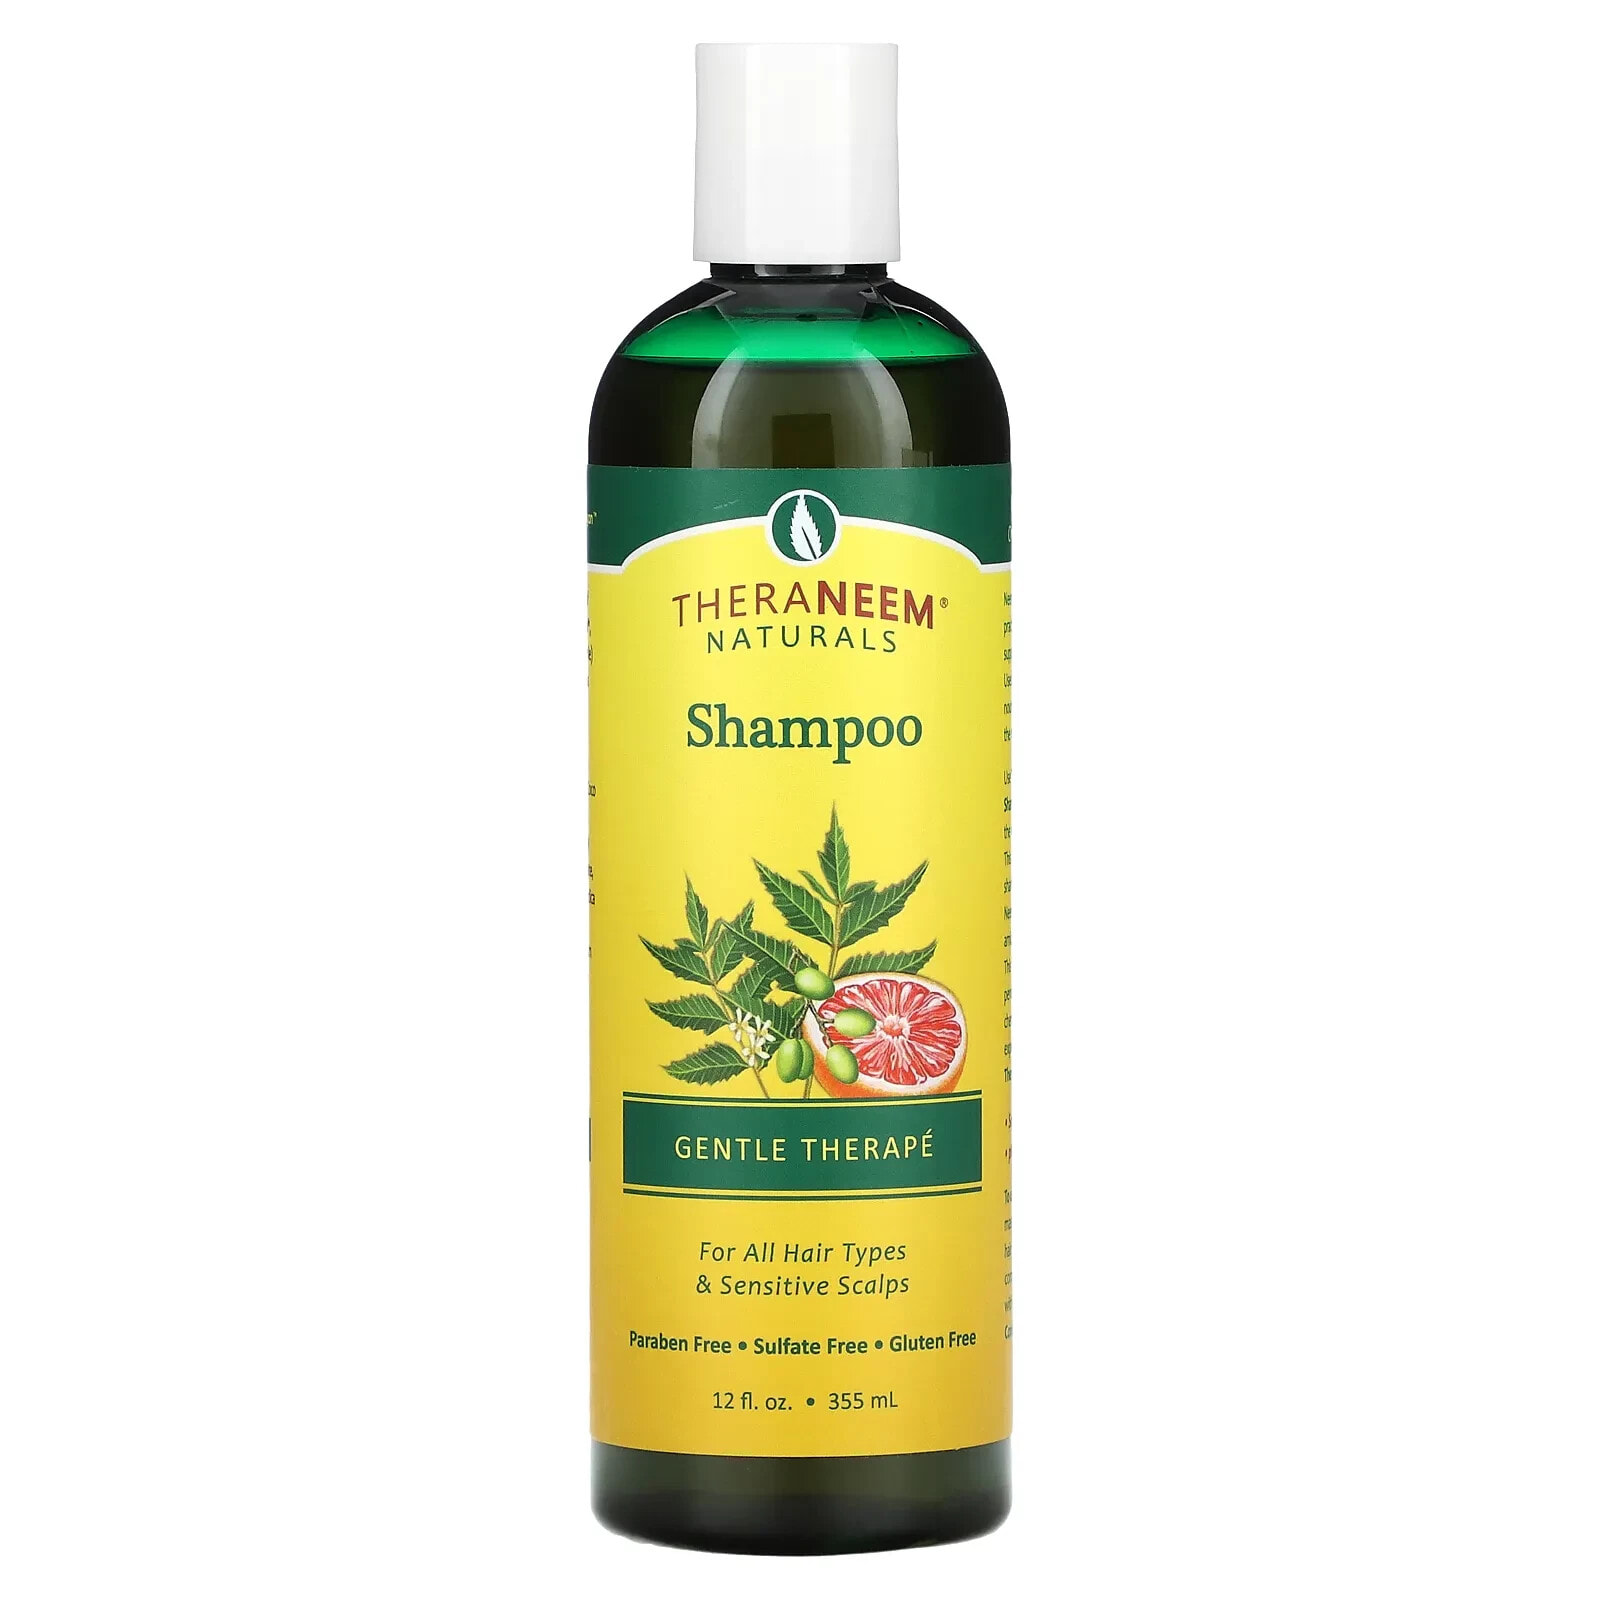 TheraNeem Naturals, Gentle Therape Shampoo, For All Hair Types & Sensitive Scalps, 12 fl oz (355 ml)